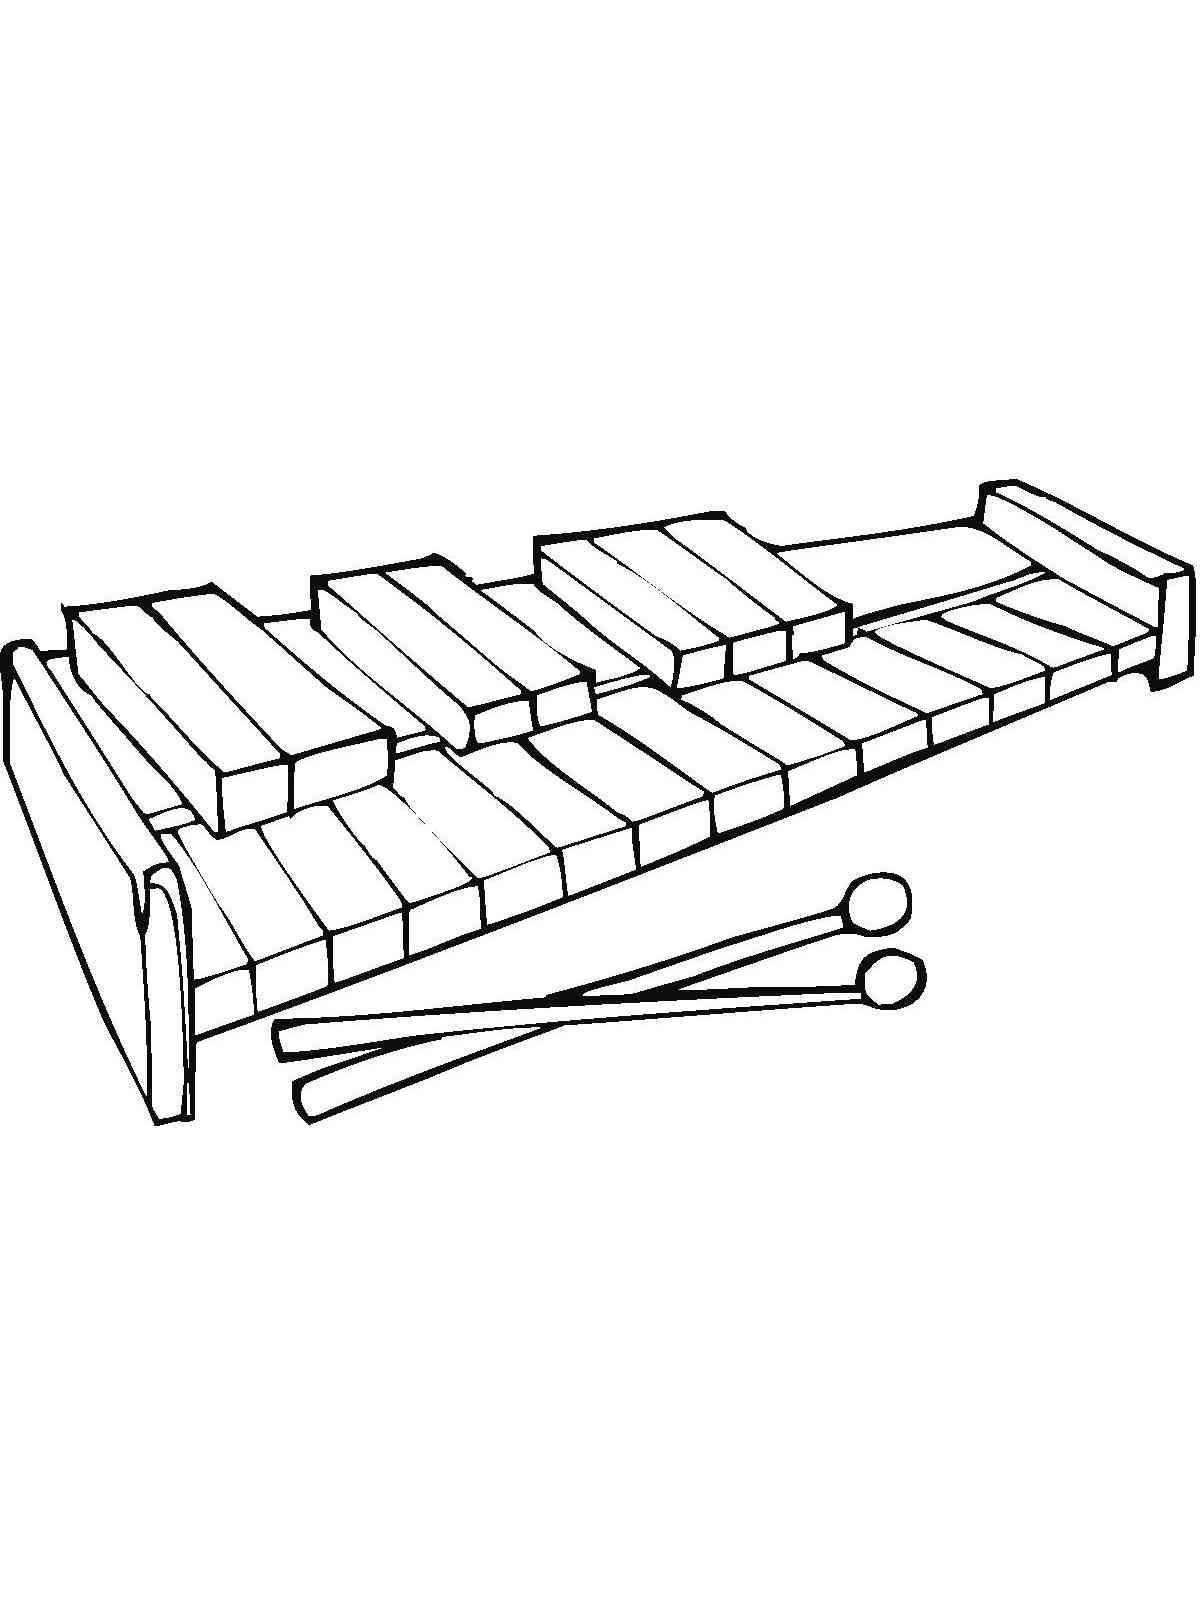 Xylophone bright coloring for the little ones